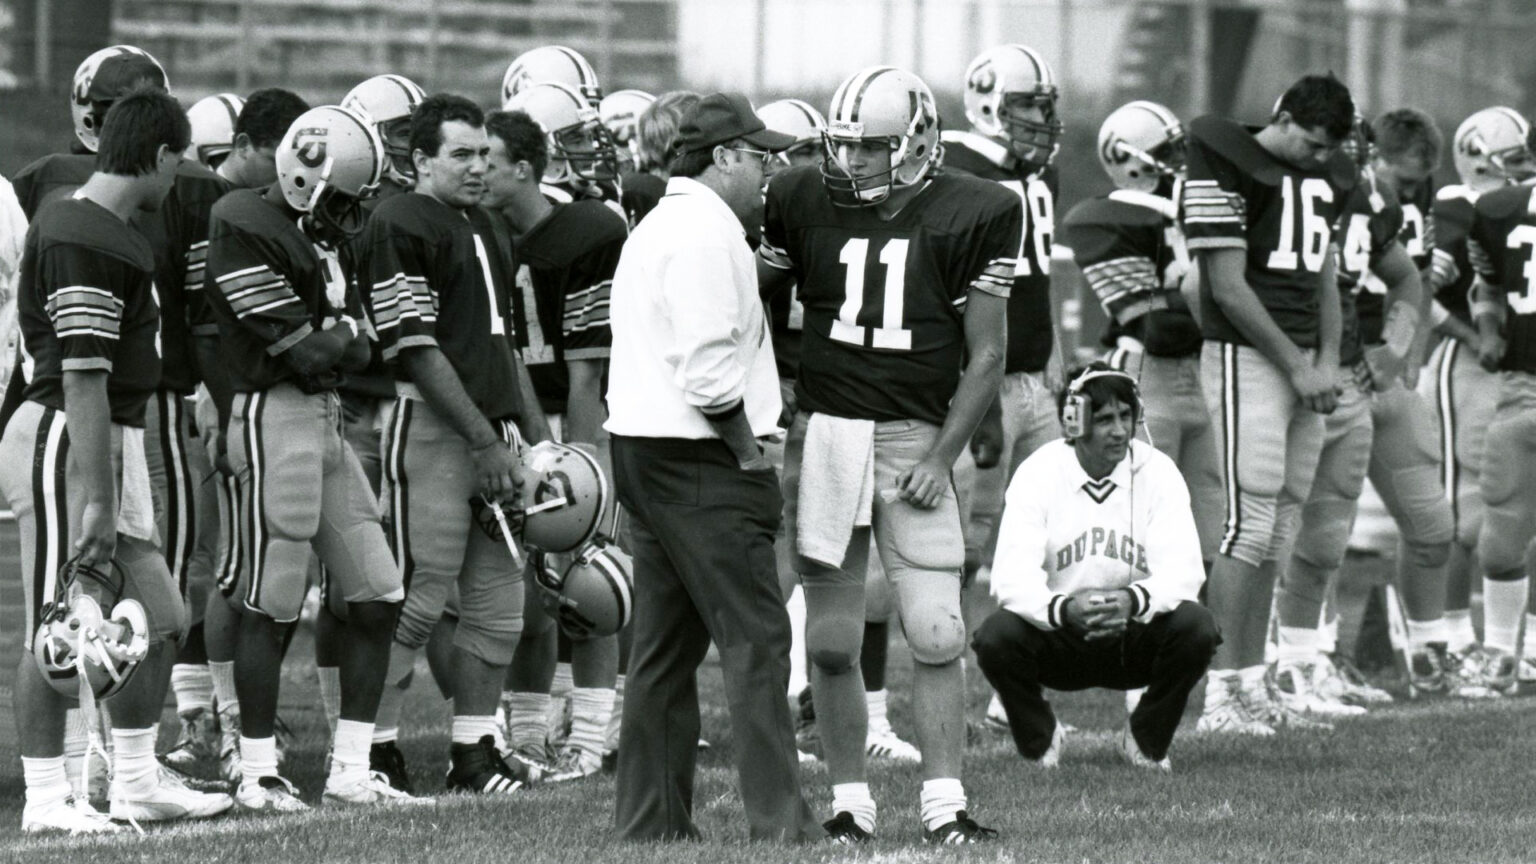 Legendary College of DuPage Football Coach Bob MacDougall Dies at 77 - College of DuPage Alumni